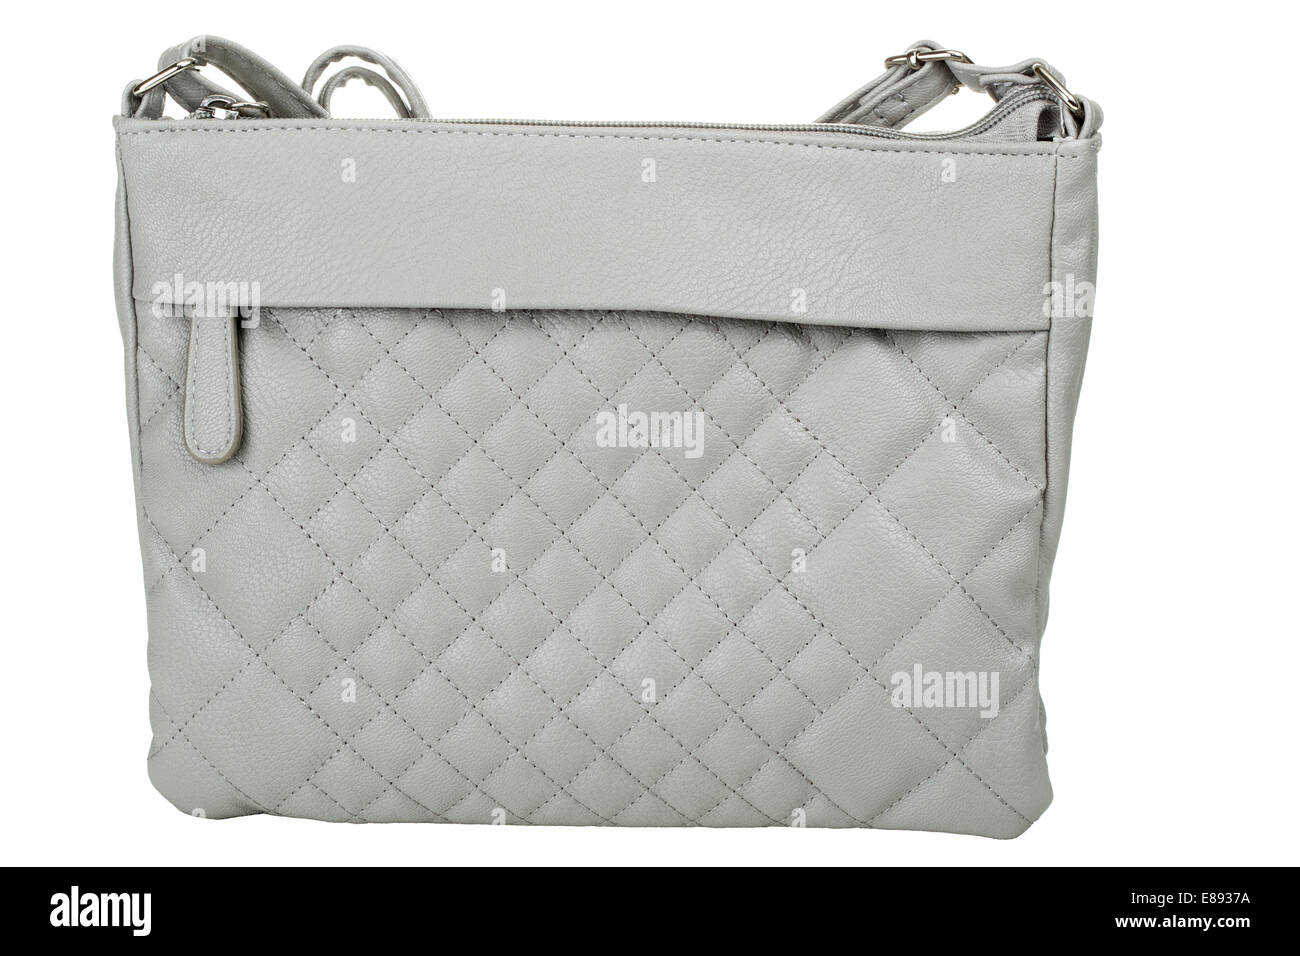 Les femmes gris bag isolated over white background Banque D'Images